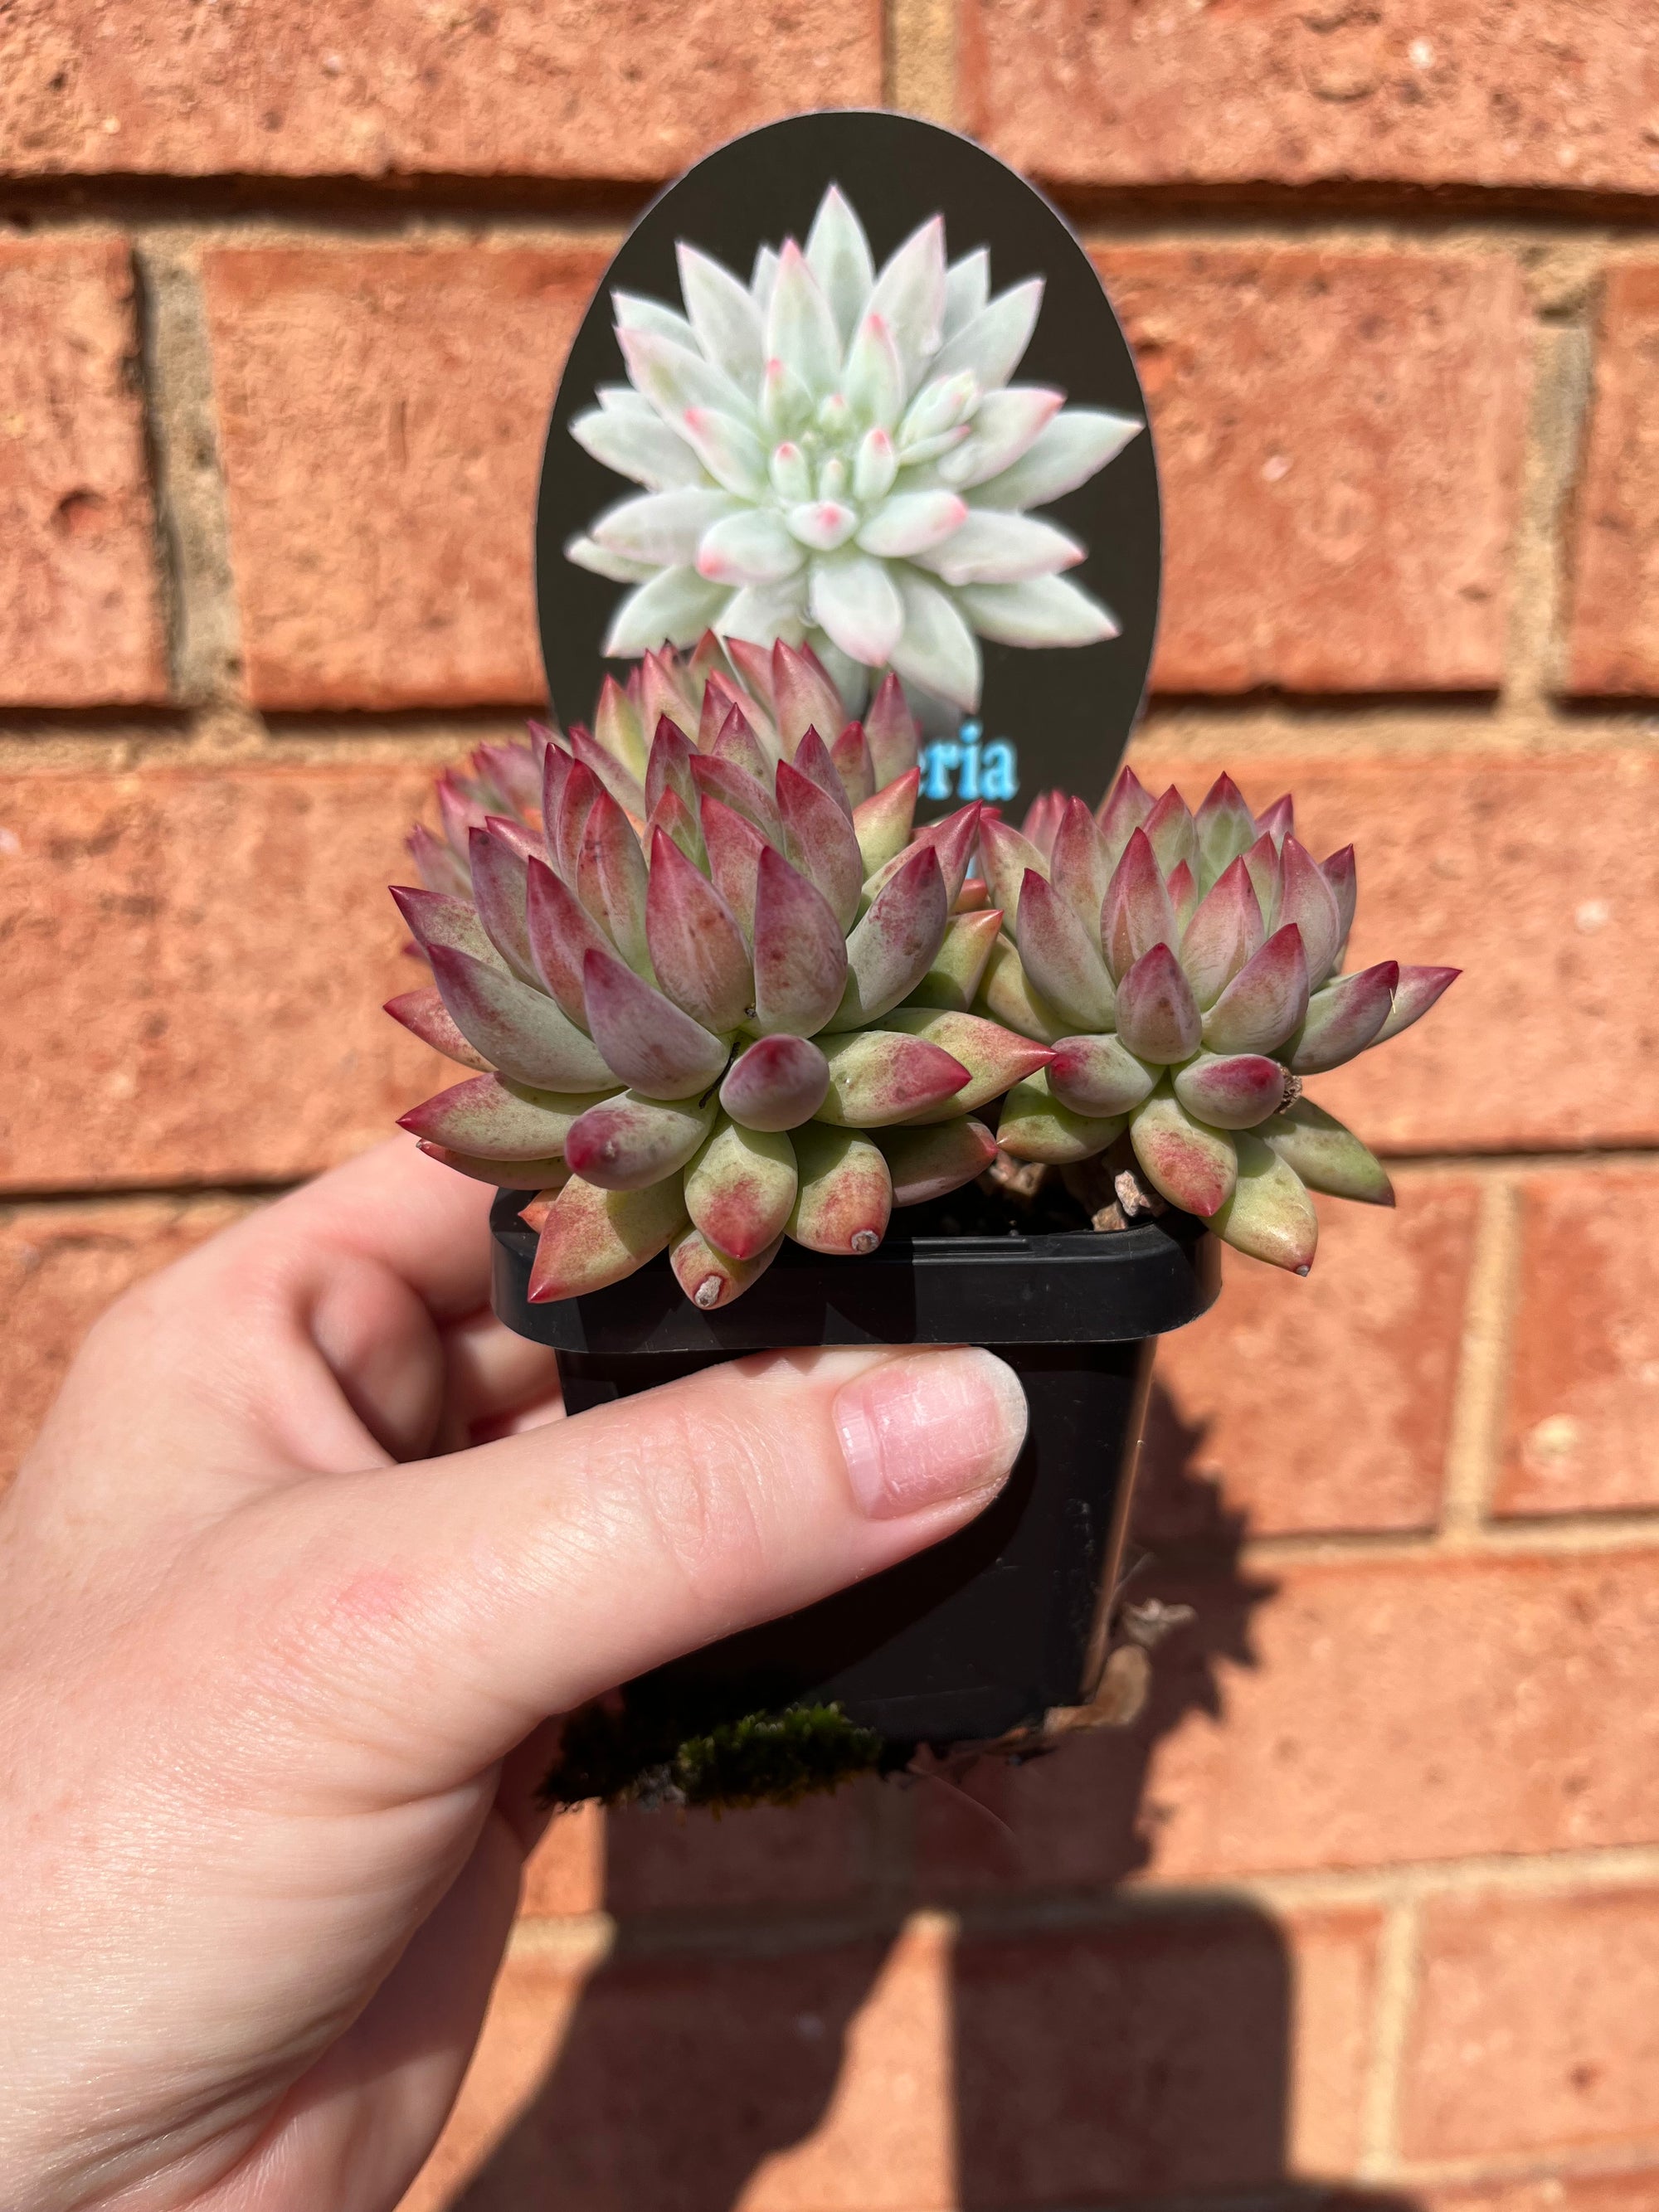 Pachyveria 'Angels Finger'